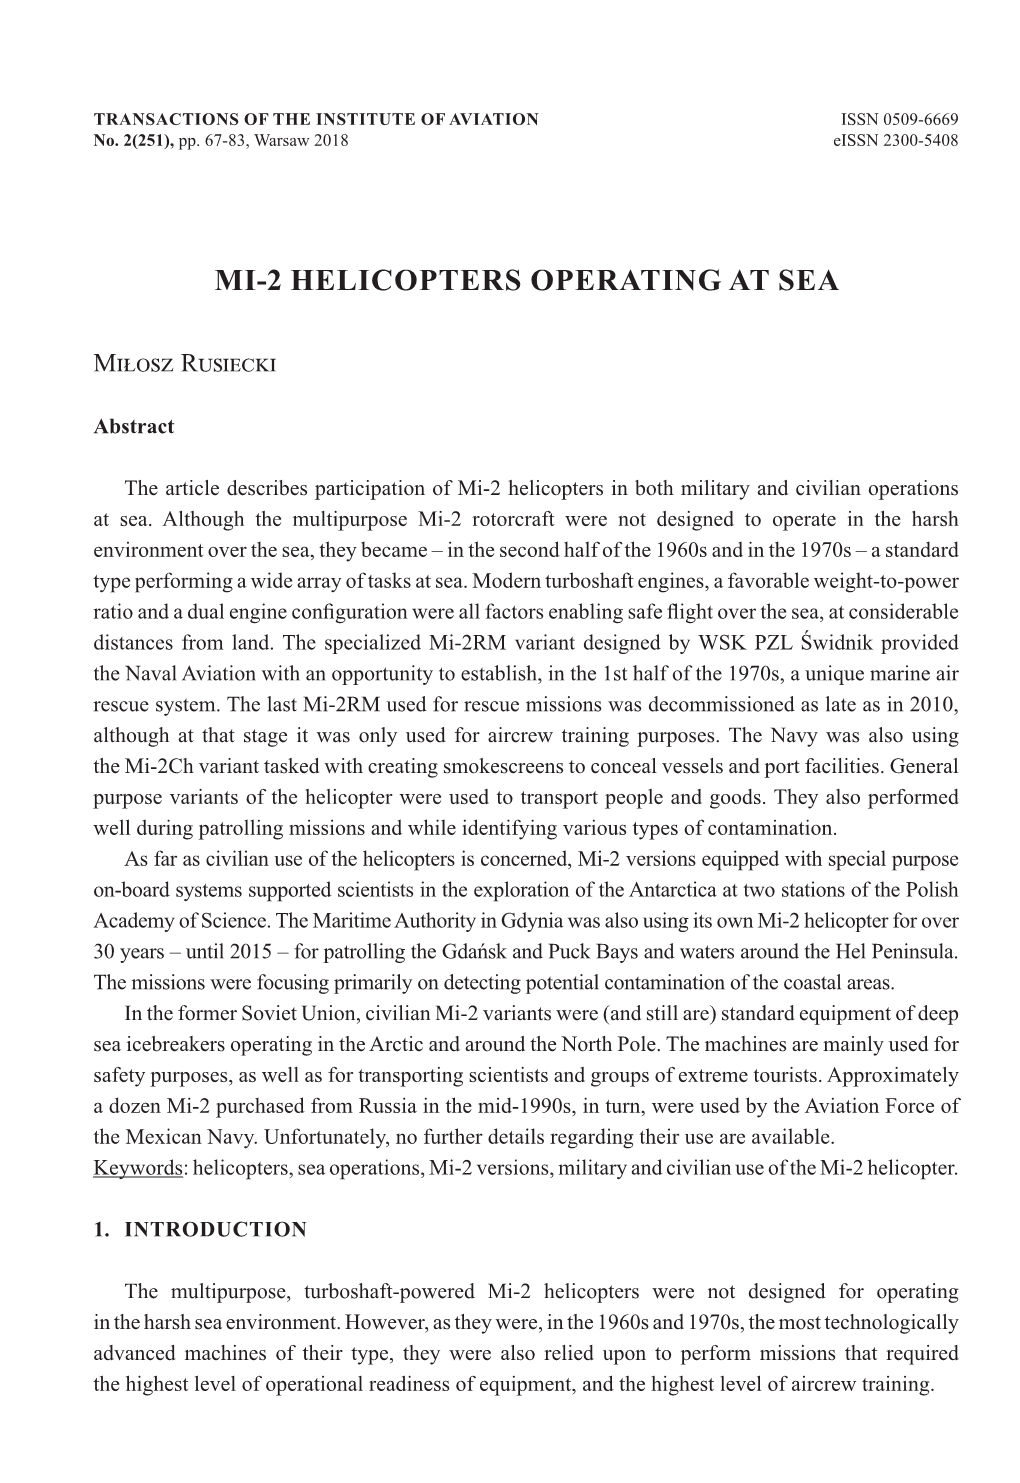 Mi-2 Helicopters Operating at Sea